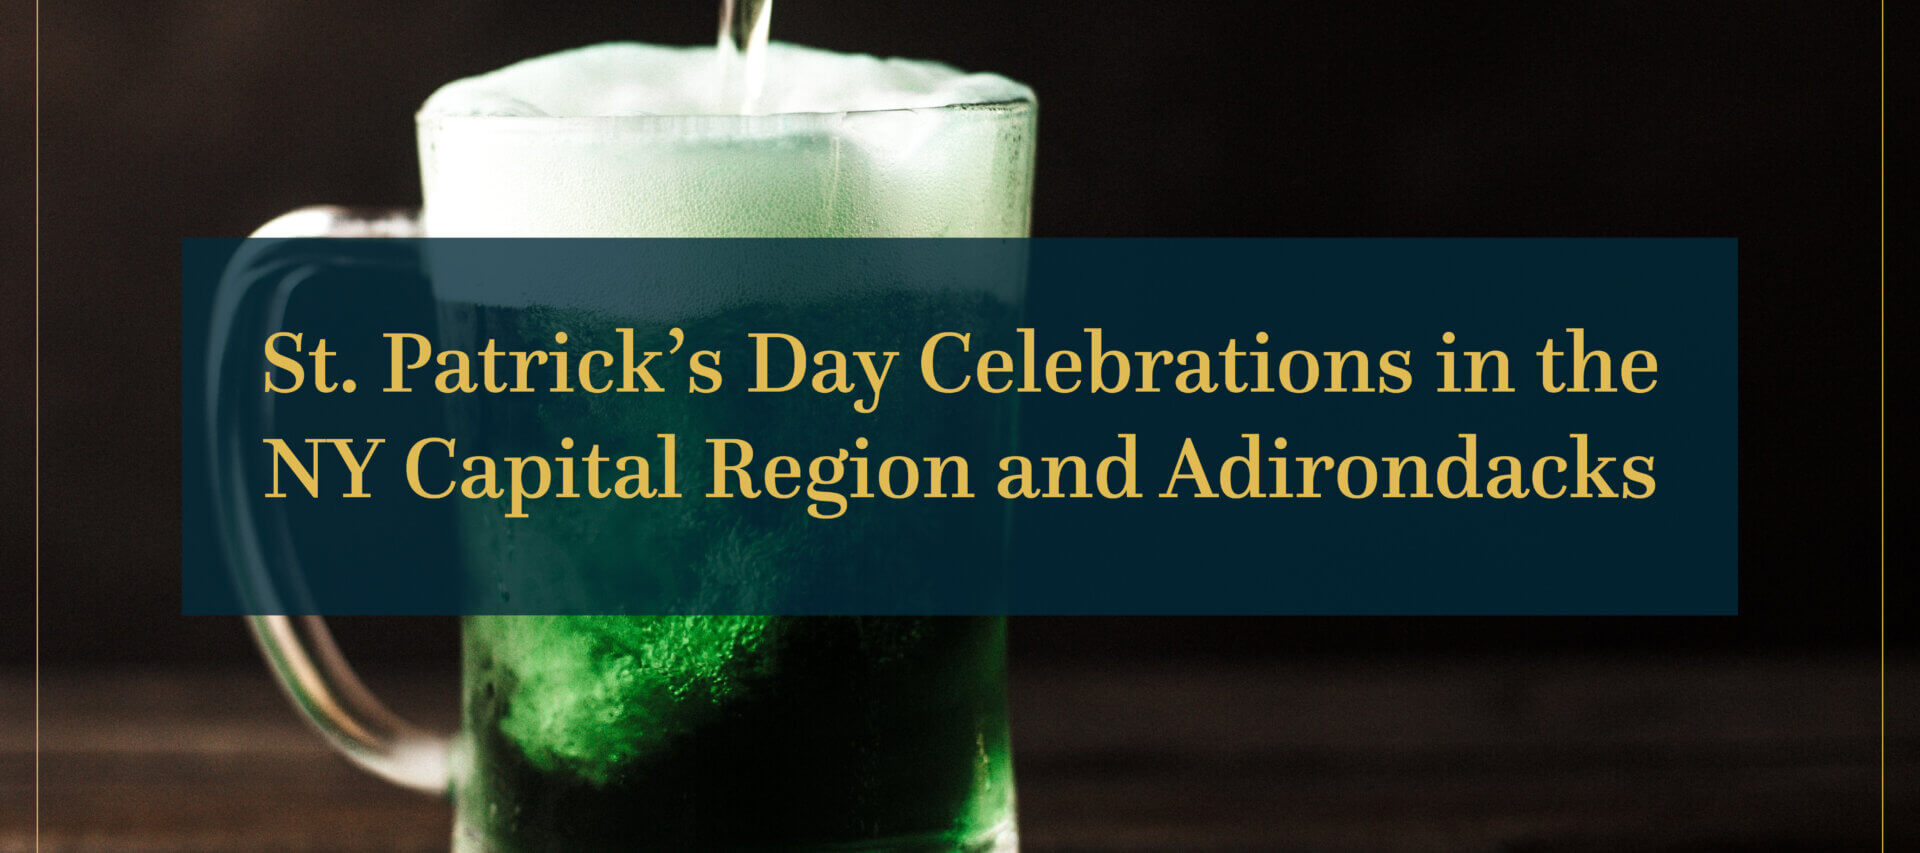 Glass Mug of Green Beer, with banner that says St. Patrick’s Day Celebrations in the NY Capital Region and Adirondacks